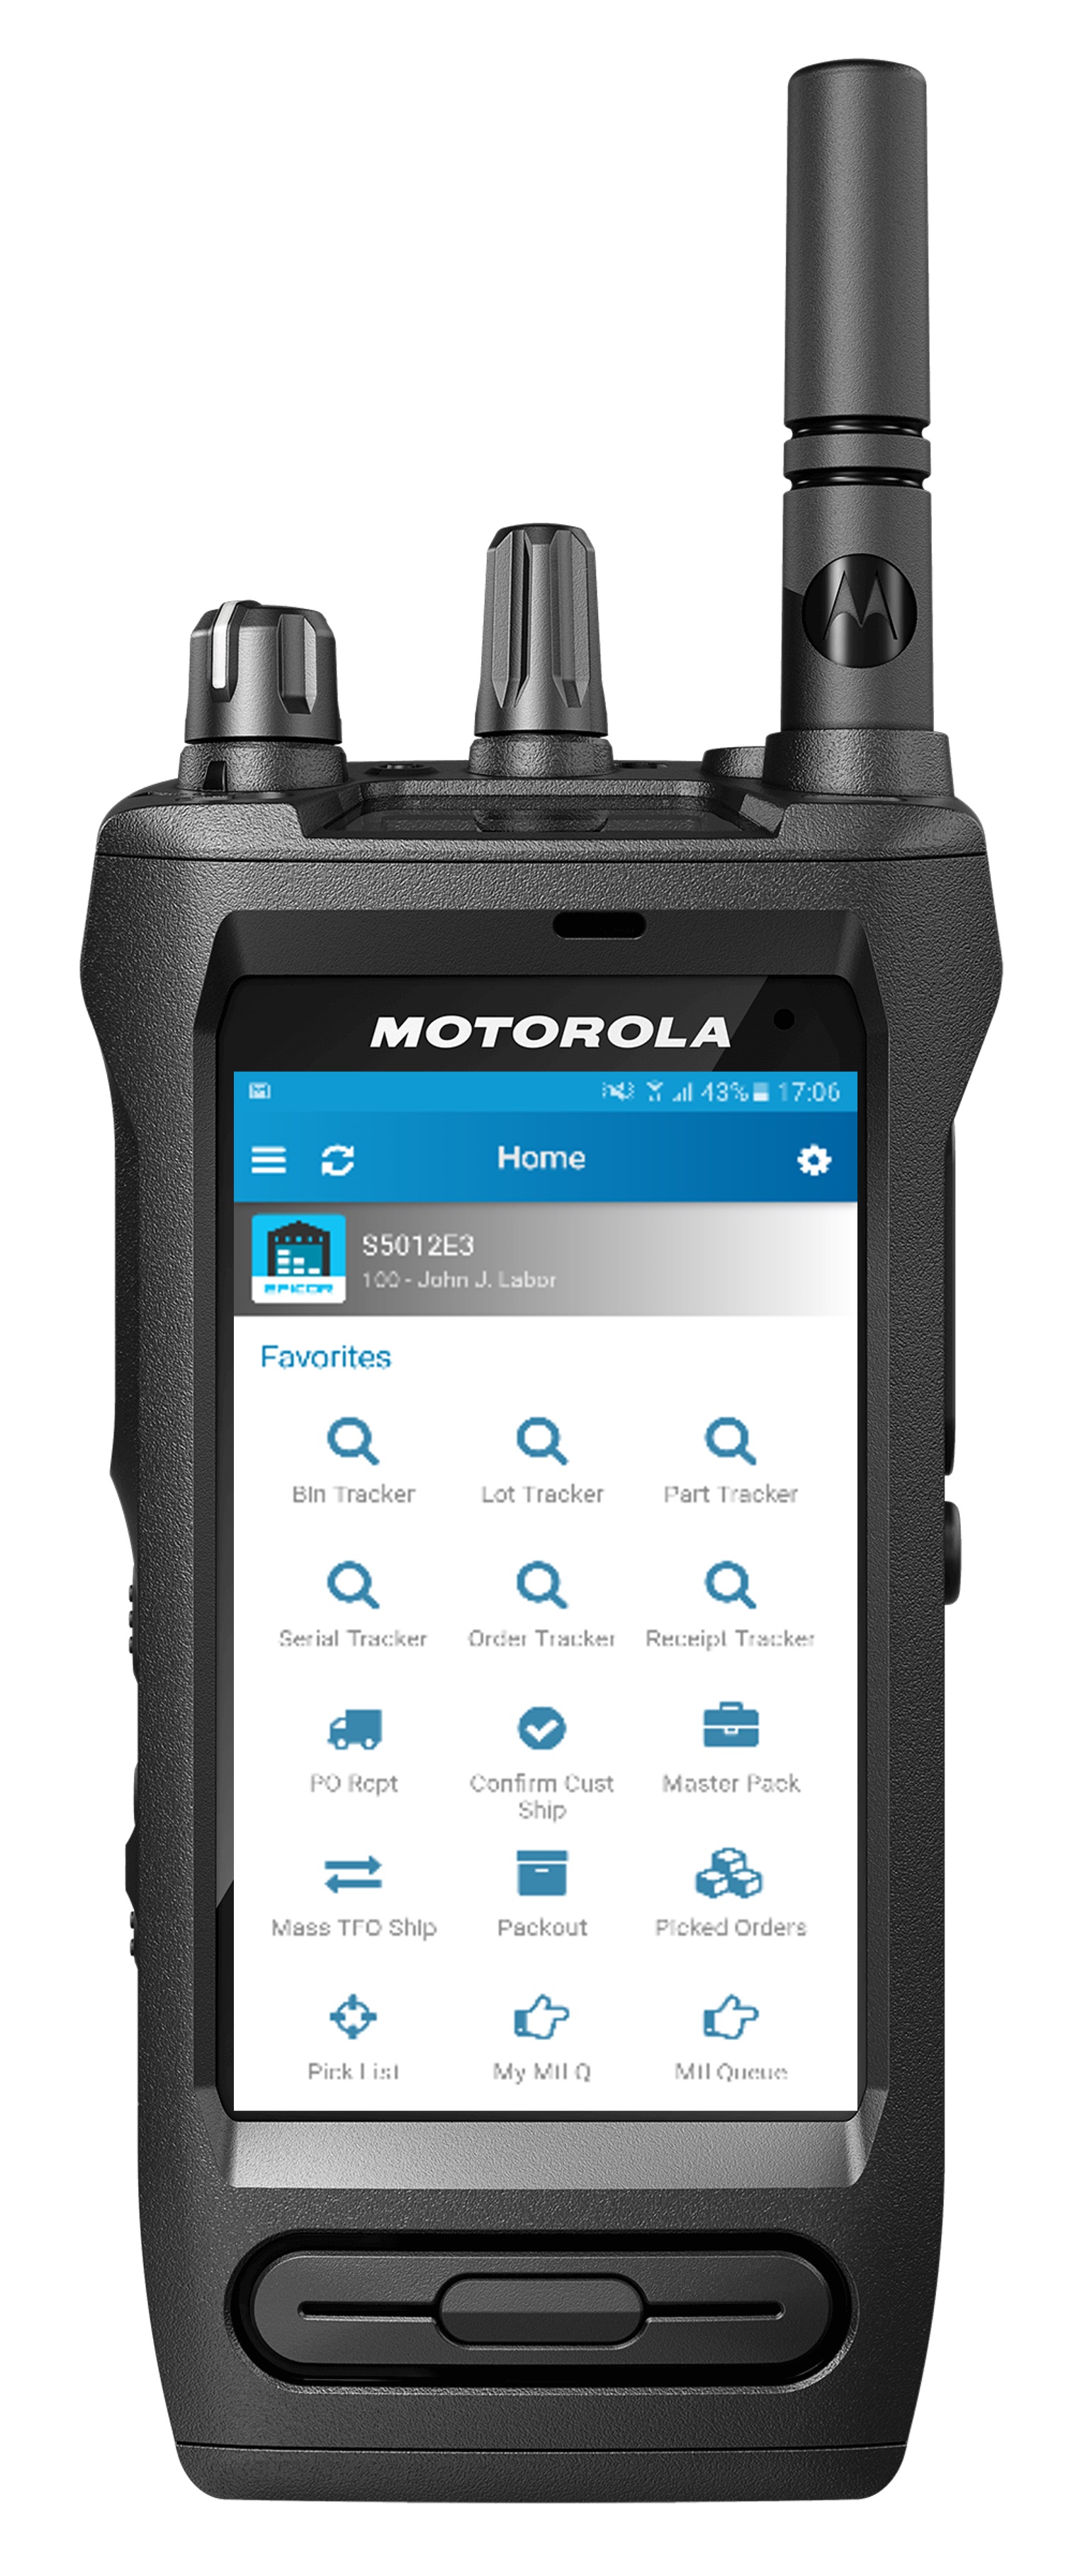 Epicor's Kinetic manufacturing platform and the Motorola Solutions MOTOTRBO™ Ion Commercial Smart Radio tackle various key warehouse management challenges.